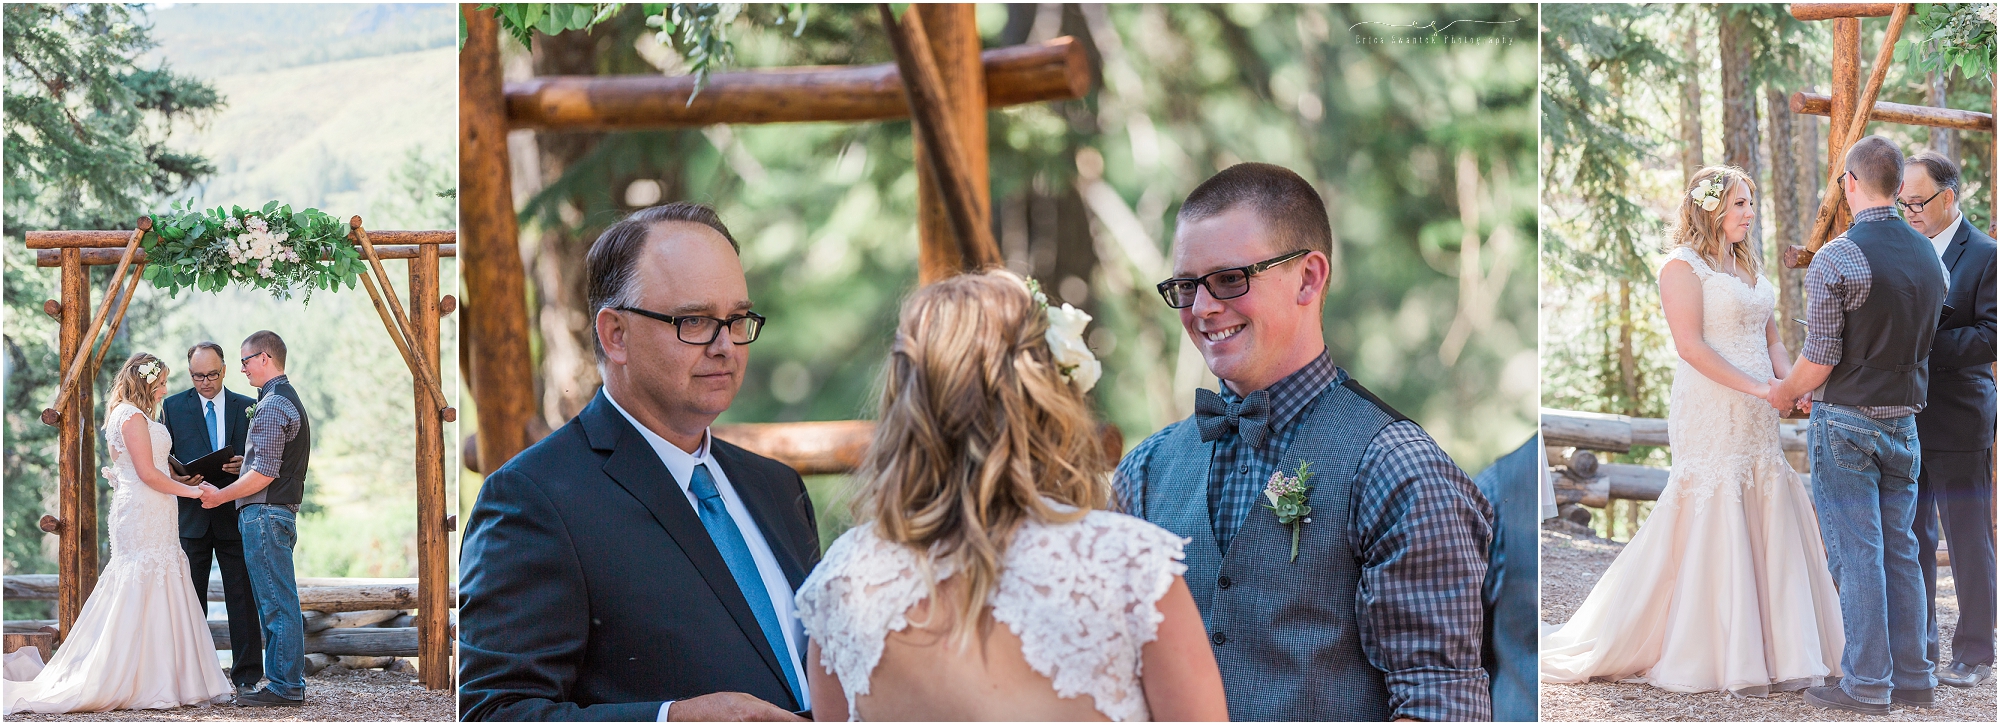 A groom is full of joy as he marries the love of his life in this sentimental Bend, OR wedding. 